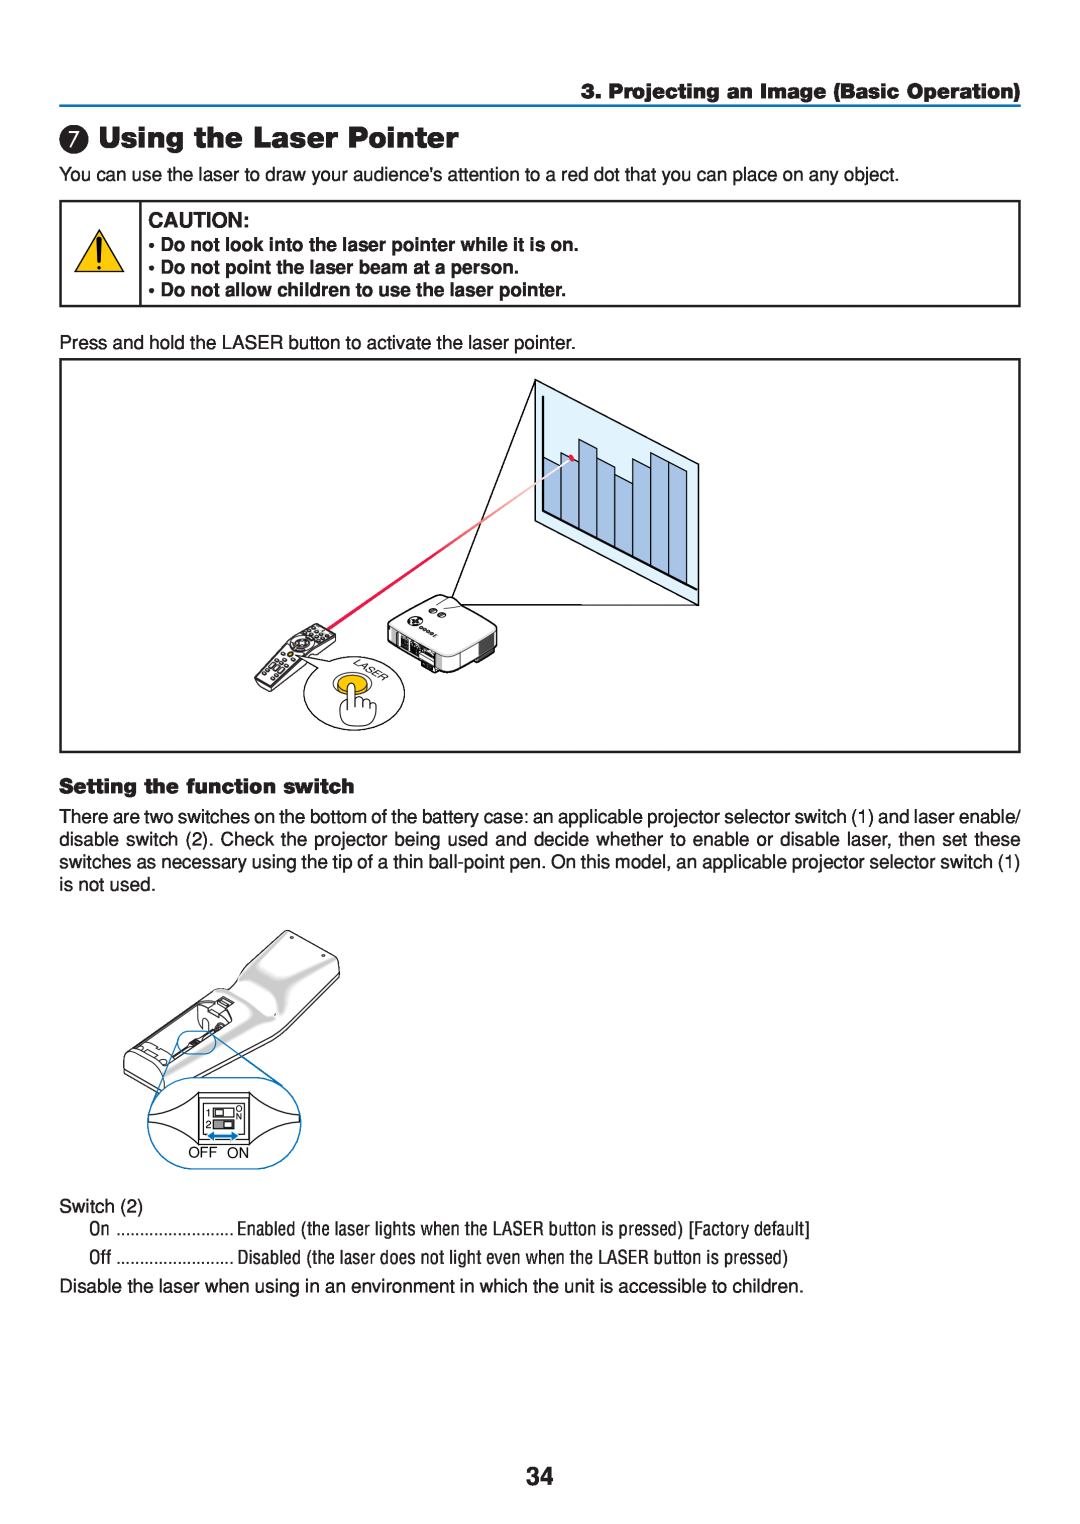 Dukane 8808 user manual Using the Laser Pointer, Setting the function switch, Projecting an Image Basic Operation 